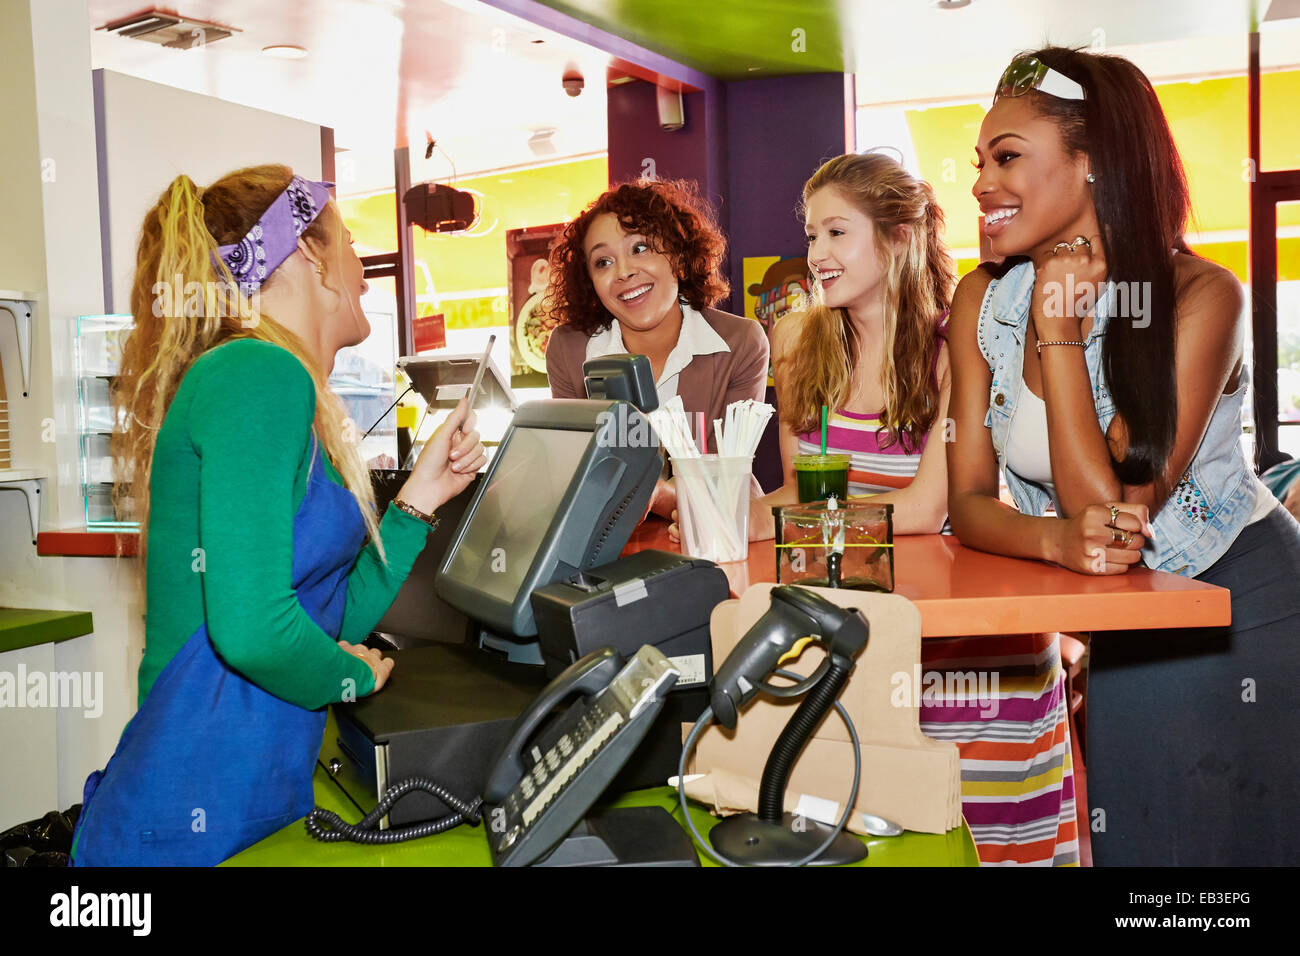 Women ordering from server in cafe Stock Photo